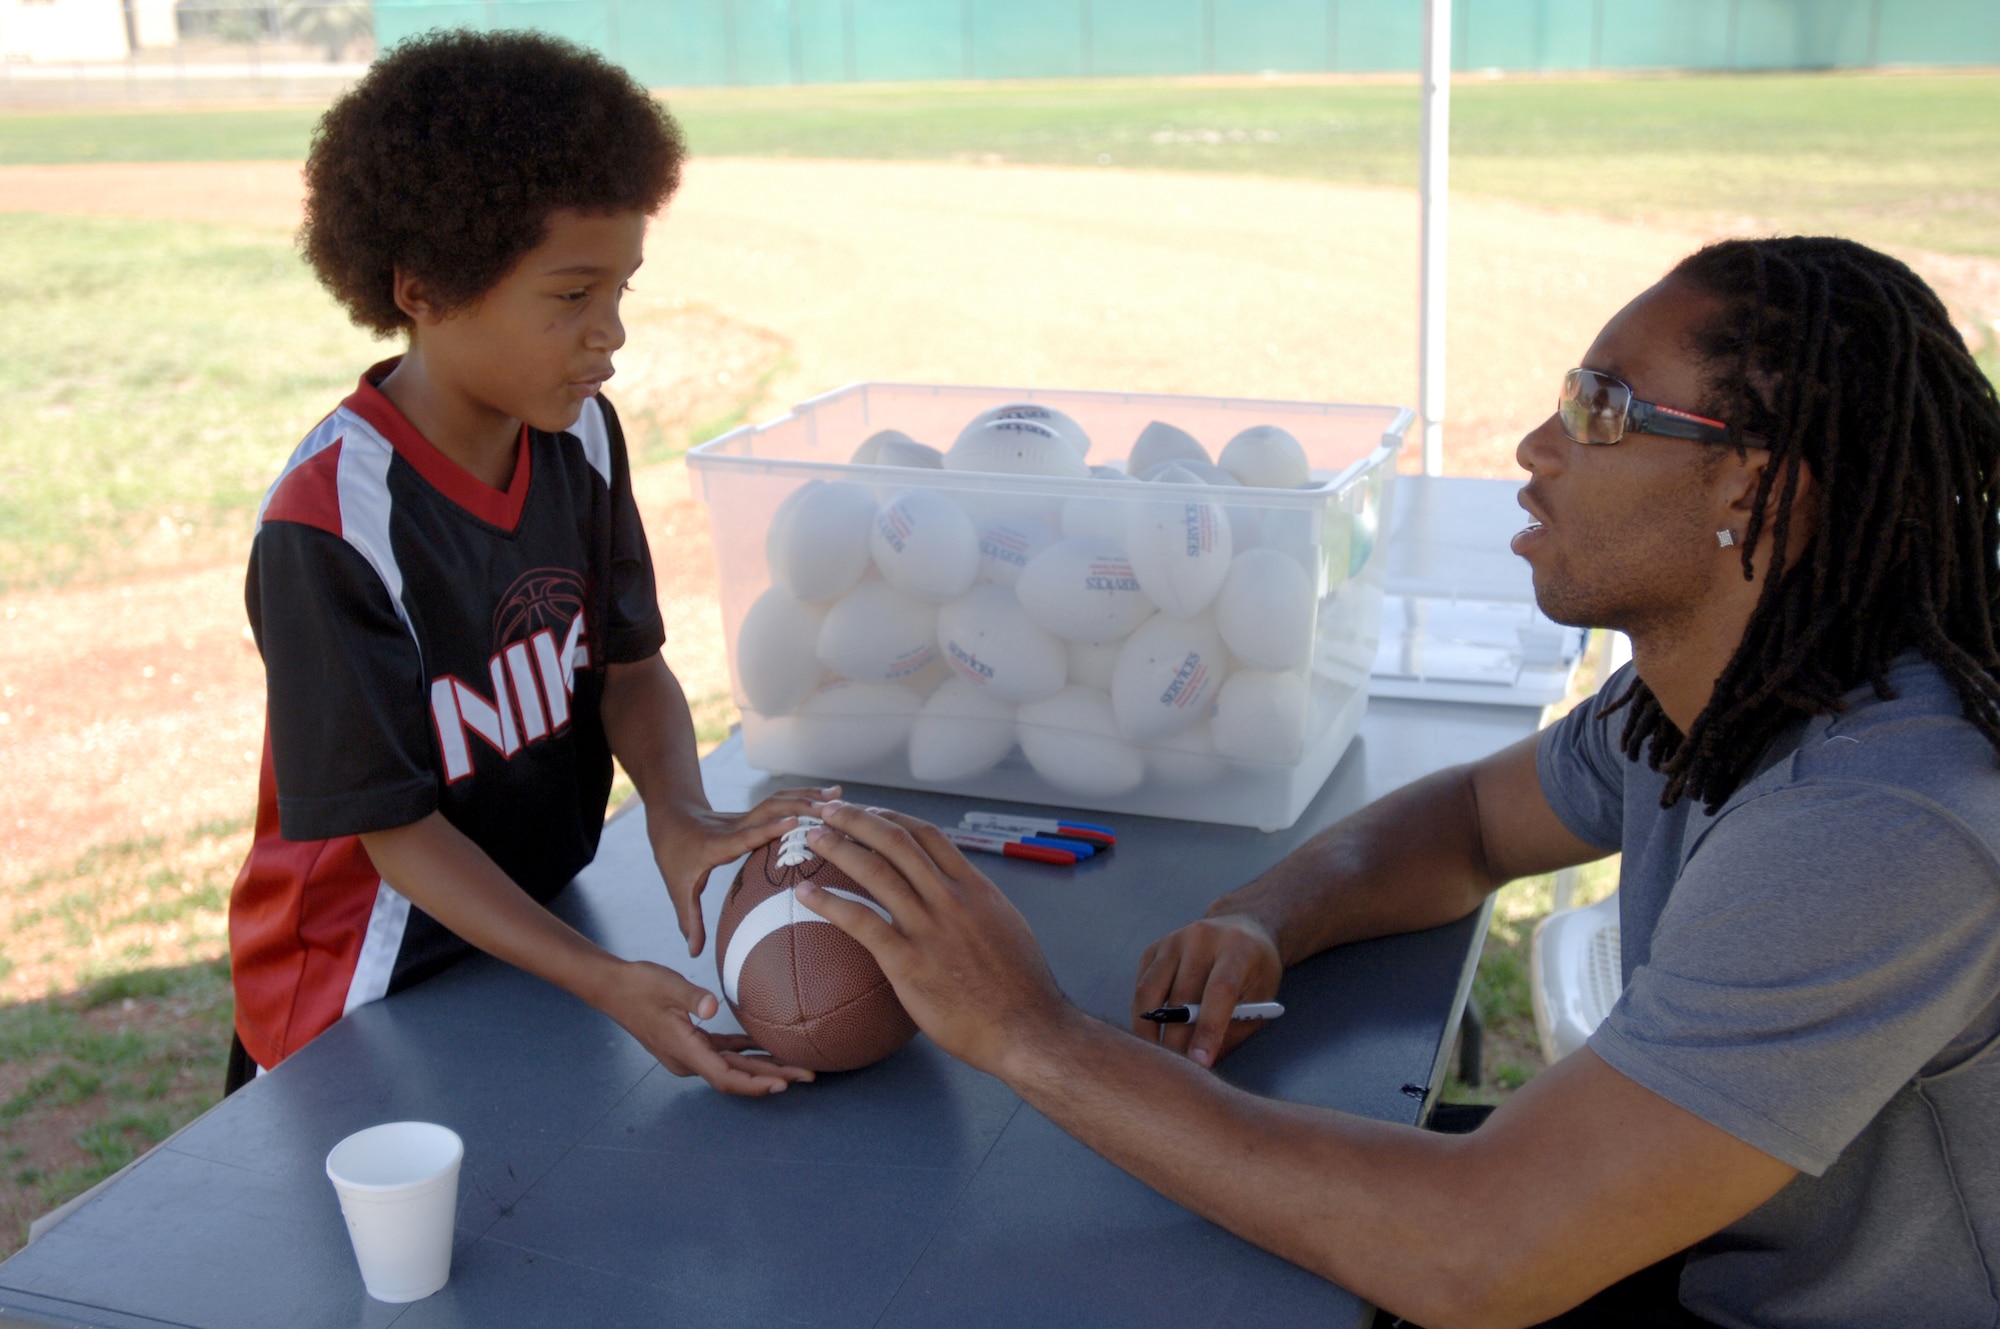 Eight-year-old DeShaun Moorer hands Arizona Cardinals wide receiver Larry Fitzgerald a football to sign during an autograph session at Incirlik Air Base, Turkey, on Wednesday, June 21. (U.S. Air Force photo/Senior Airman Larry Reid Jr.) 

